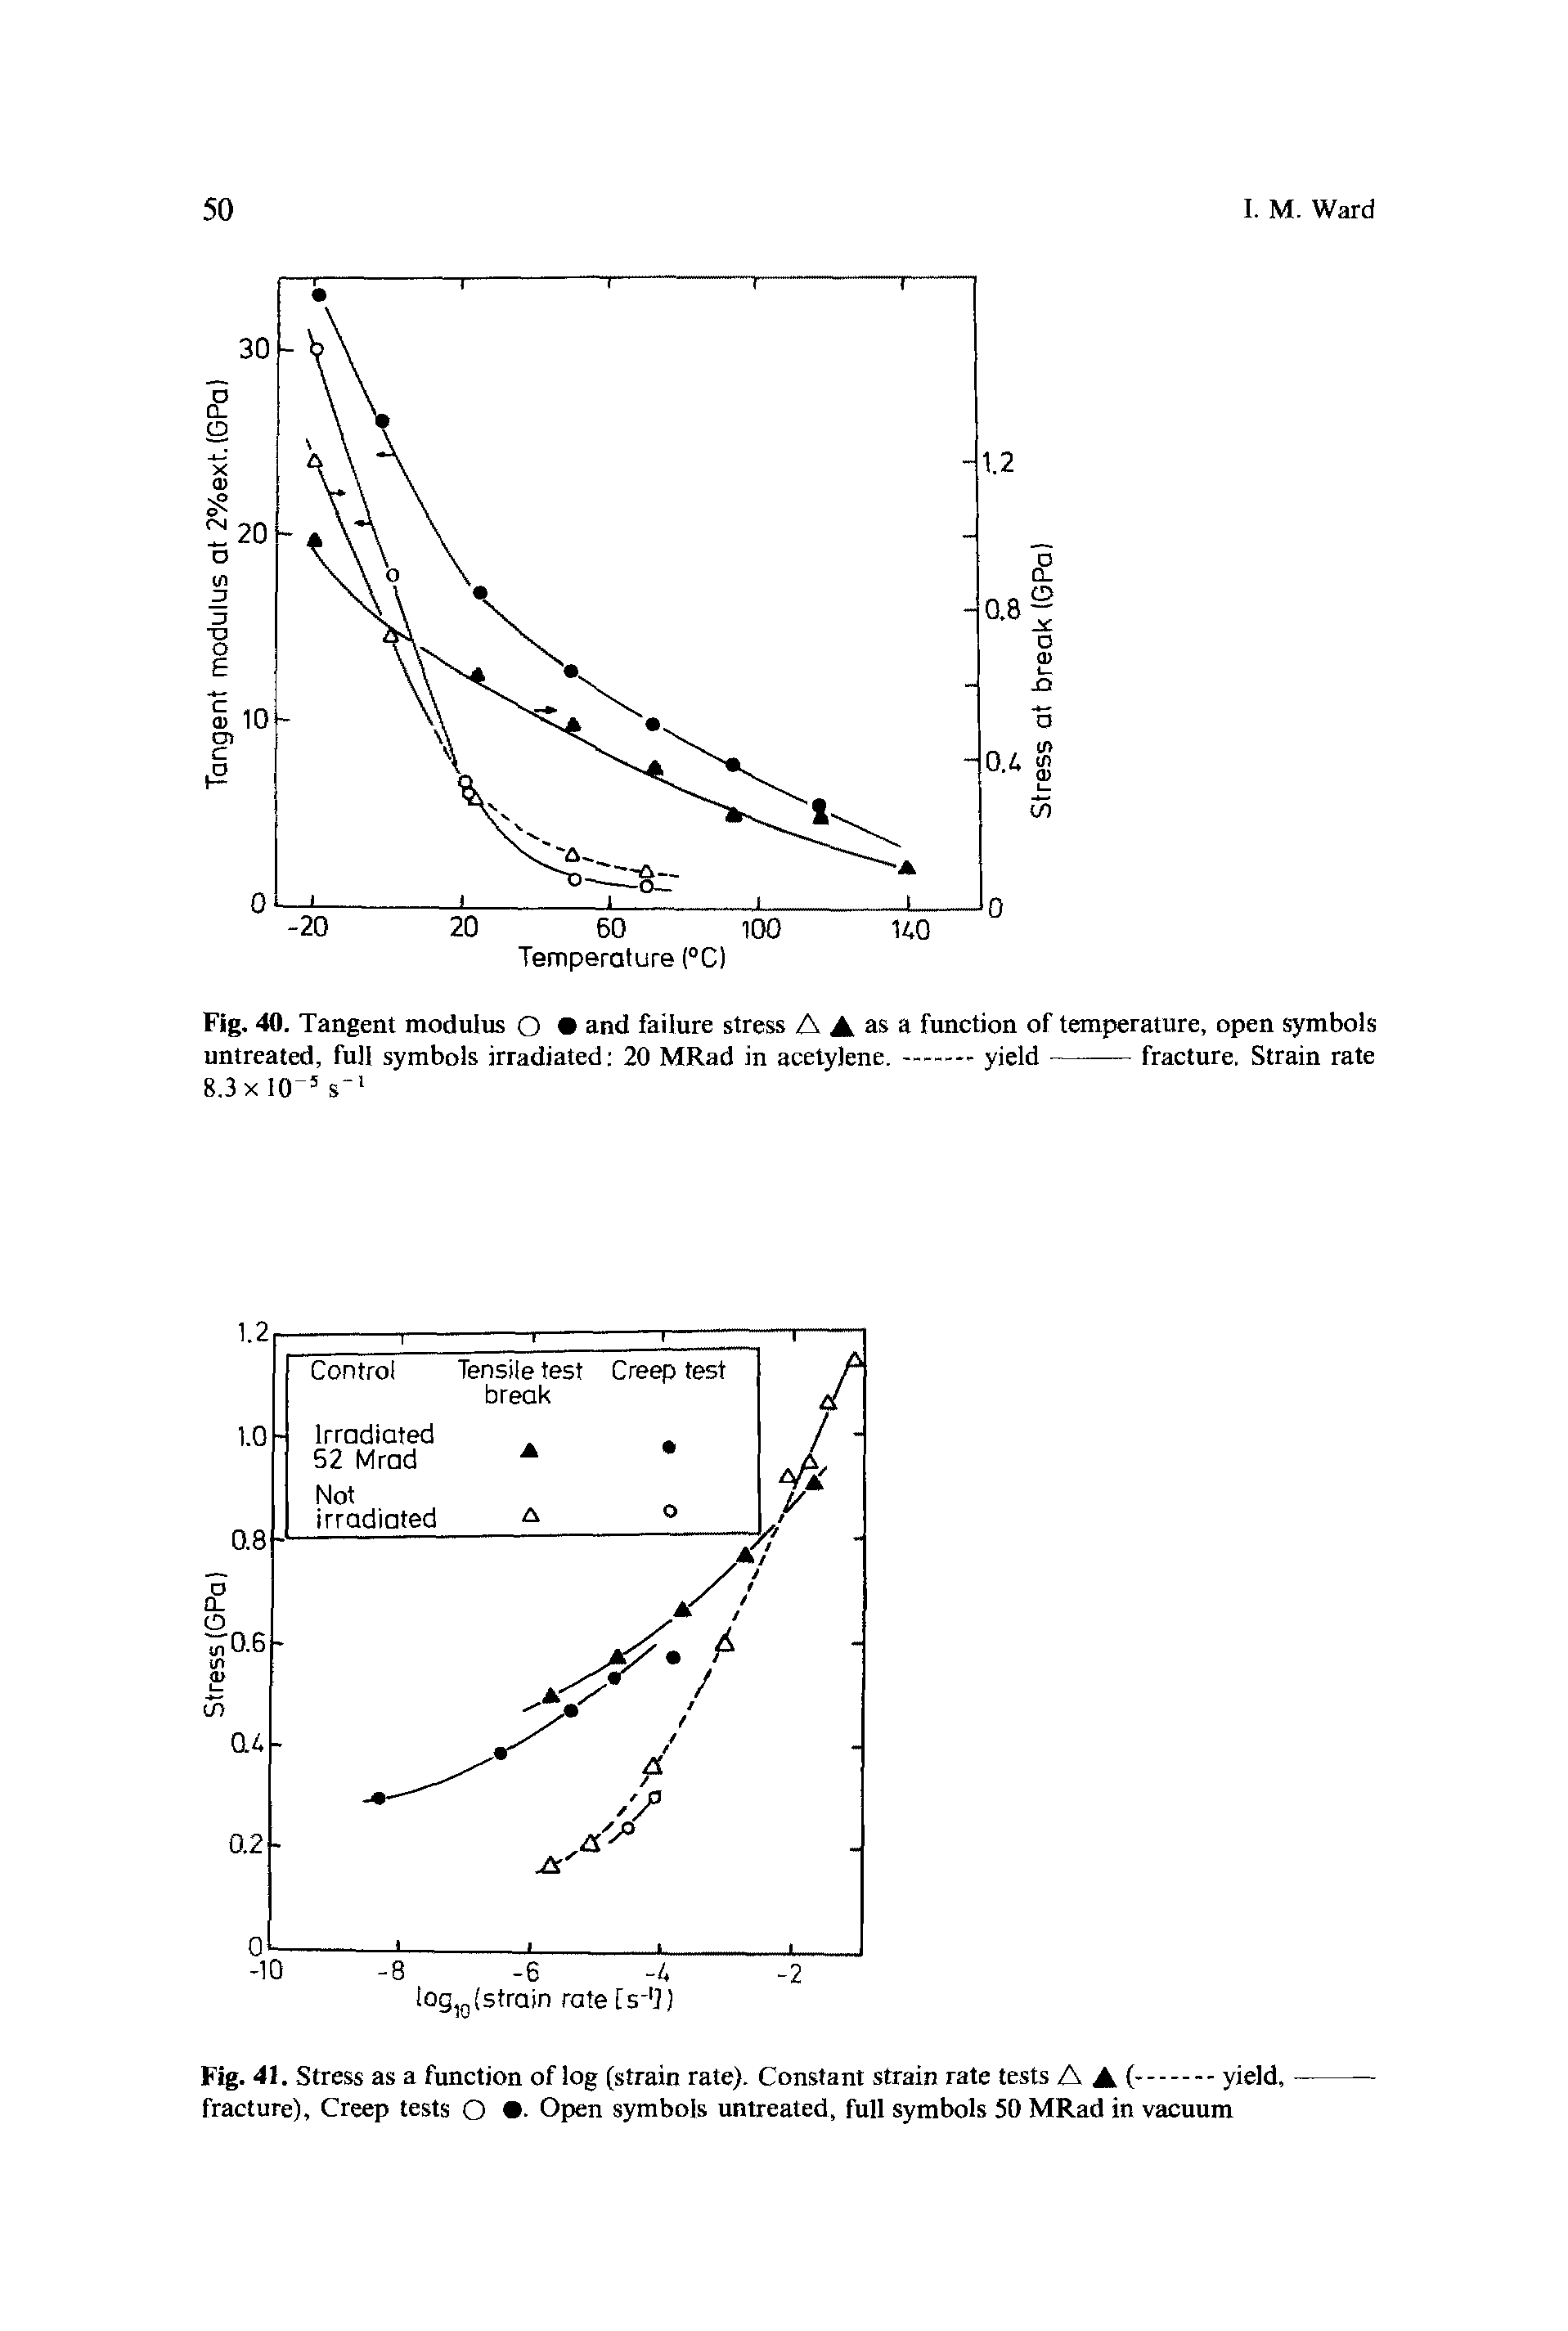 Fig. 41. Stress as a function of log (strain rate). Constant strain rate tests A A (.yield,...